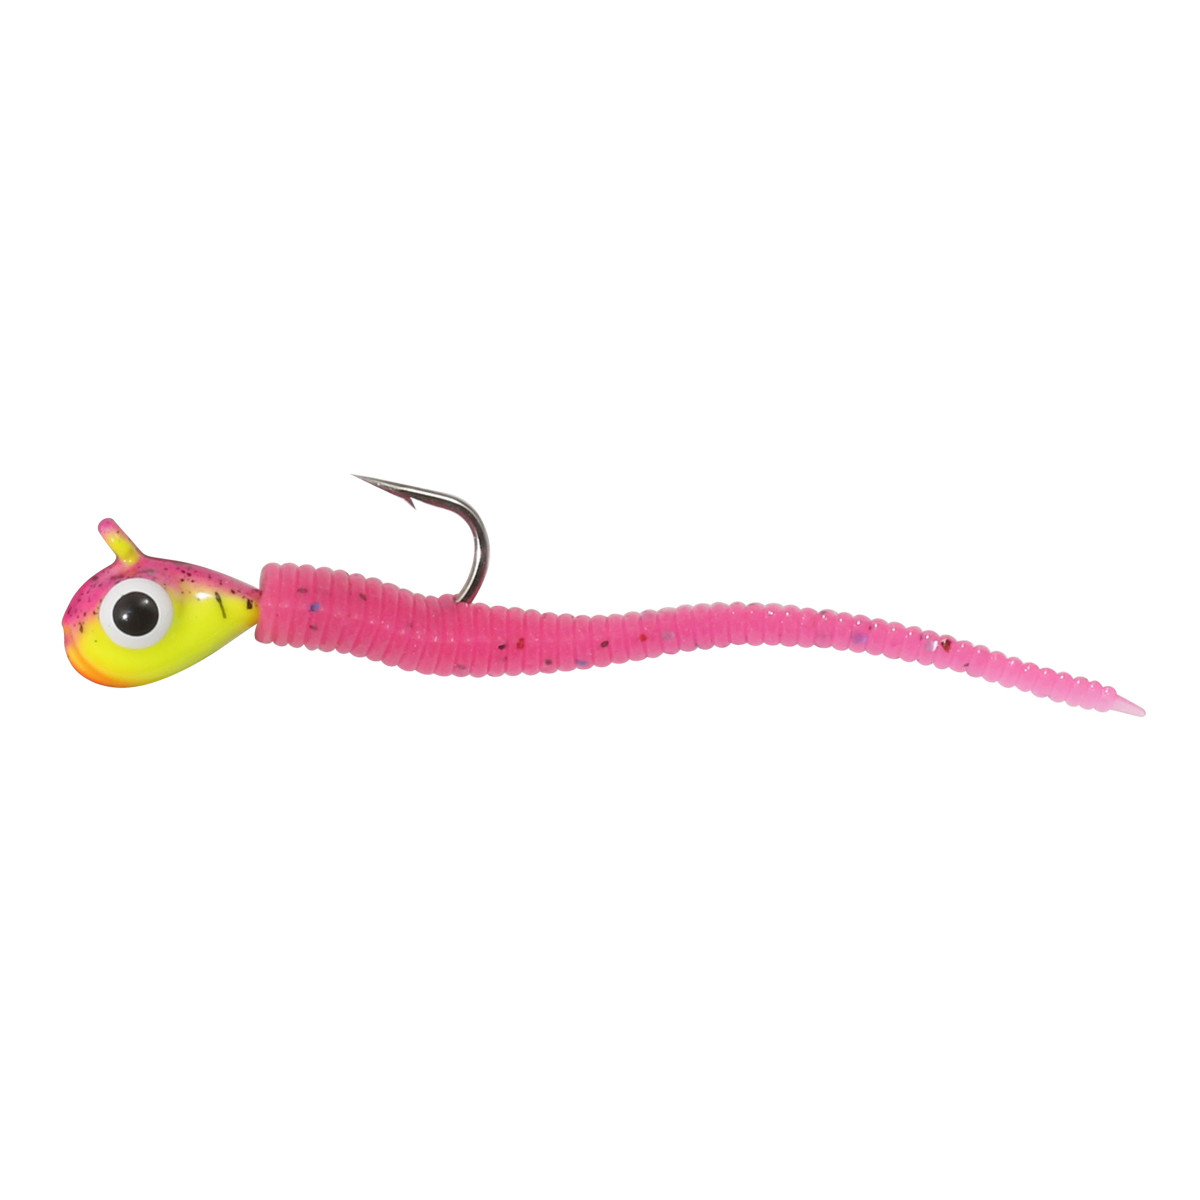 Northland Fishing Tackle Rigged Tungsten Bloodworm Lure — CampSaver